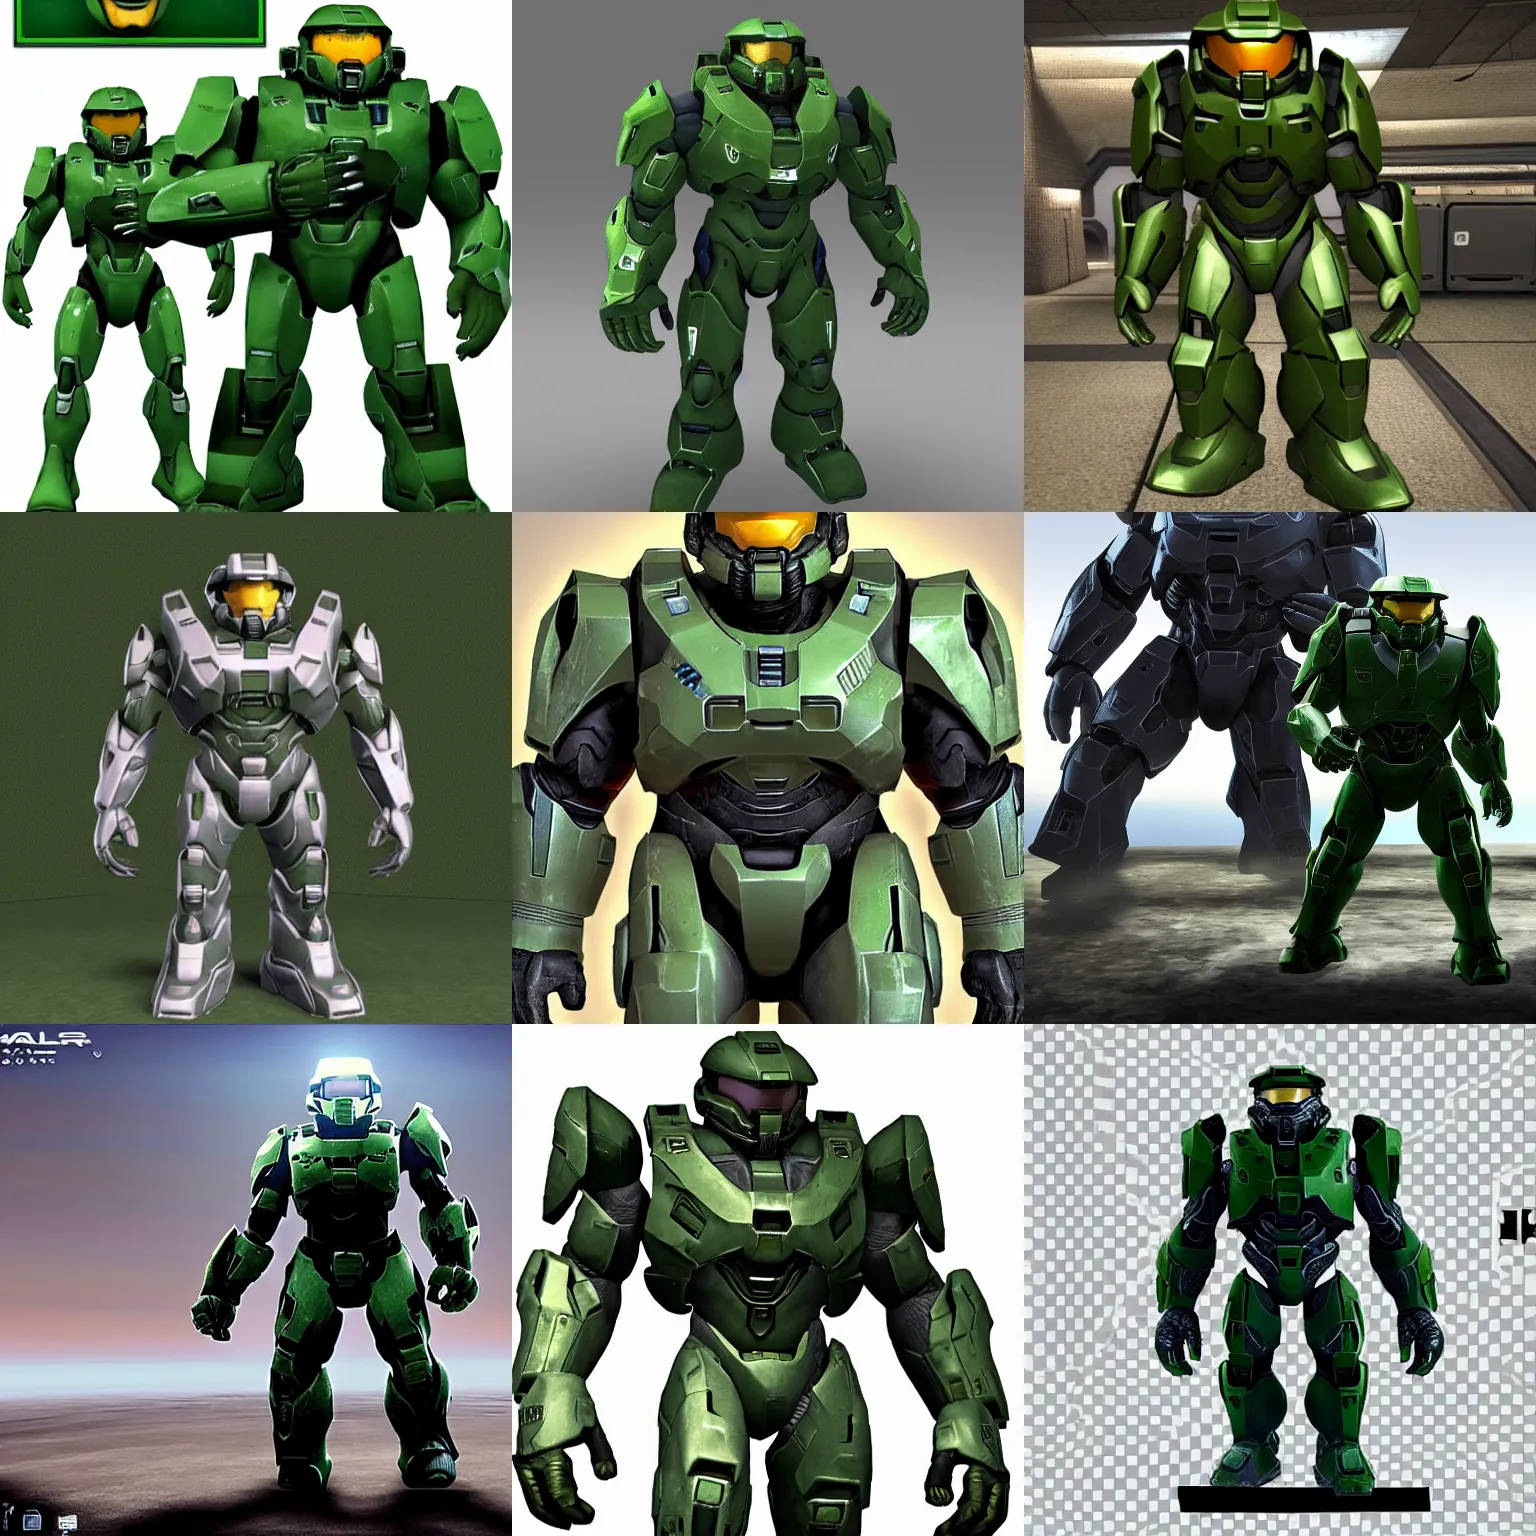 Prompt: small head master chief from halo with a big massive gigantic body and gorilla arms and a tiny tiny tiny tiny tiny tiny tiny tiny tiny tiny tiny tiny tiny tiny tiny tiny tiny tiny tiny tiny tiny tiny tiny tiny tiny tiny tiny tiny tiny tiny tiny tiny tiny tiny head, super tiny head, miniscule head, vrchat